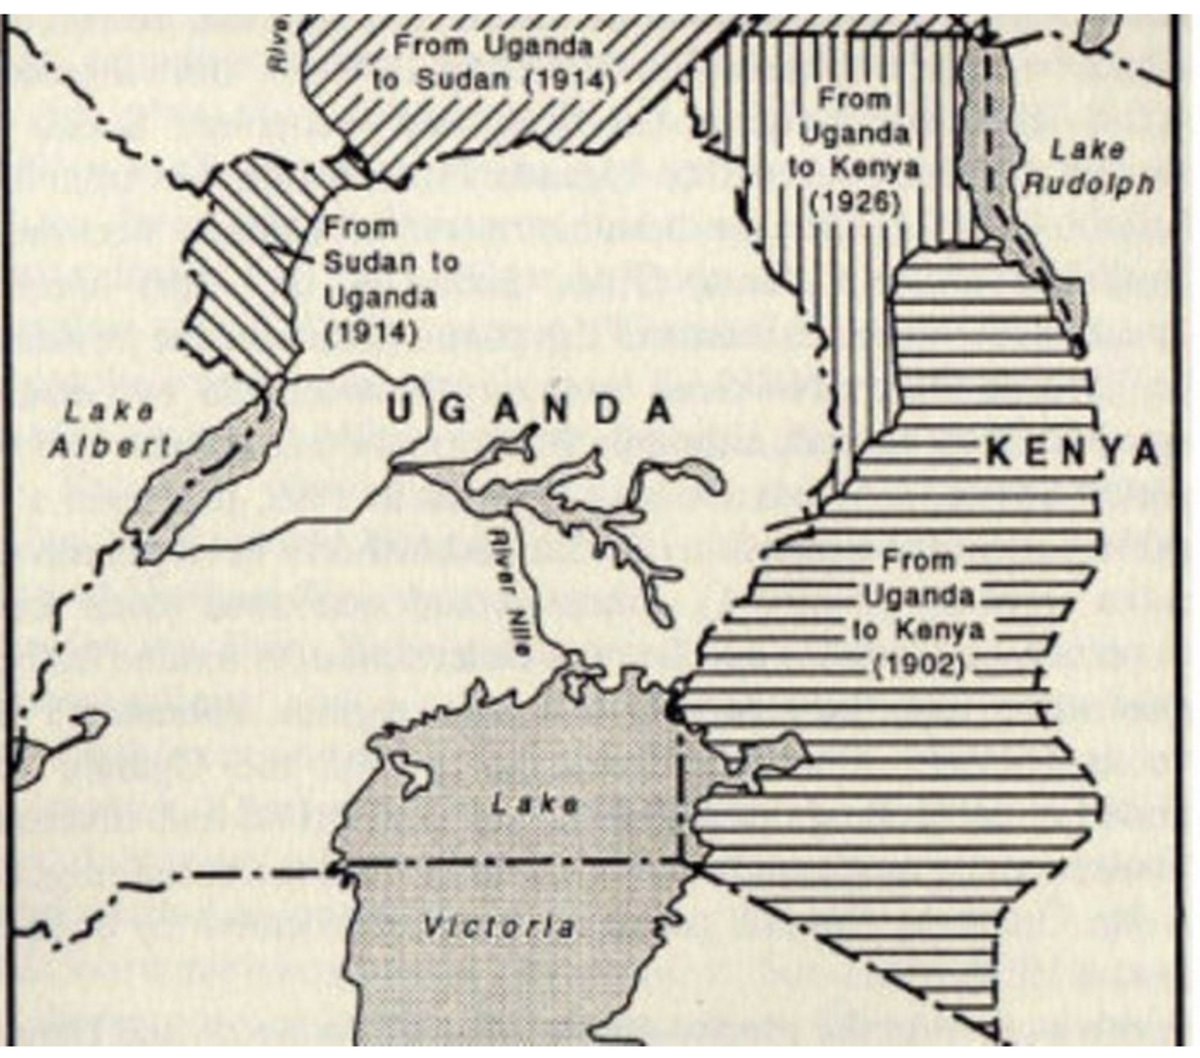 The area between Kenya-Uganda and the eastern escarpment of the Rift valley was part of Uganda Protectorate? When the railway running from Mombasa to Kisumu was completed, a decision was made to transfer the eastern province of Uganda Protectorate to East African Protectorate.